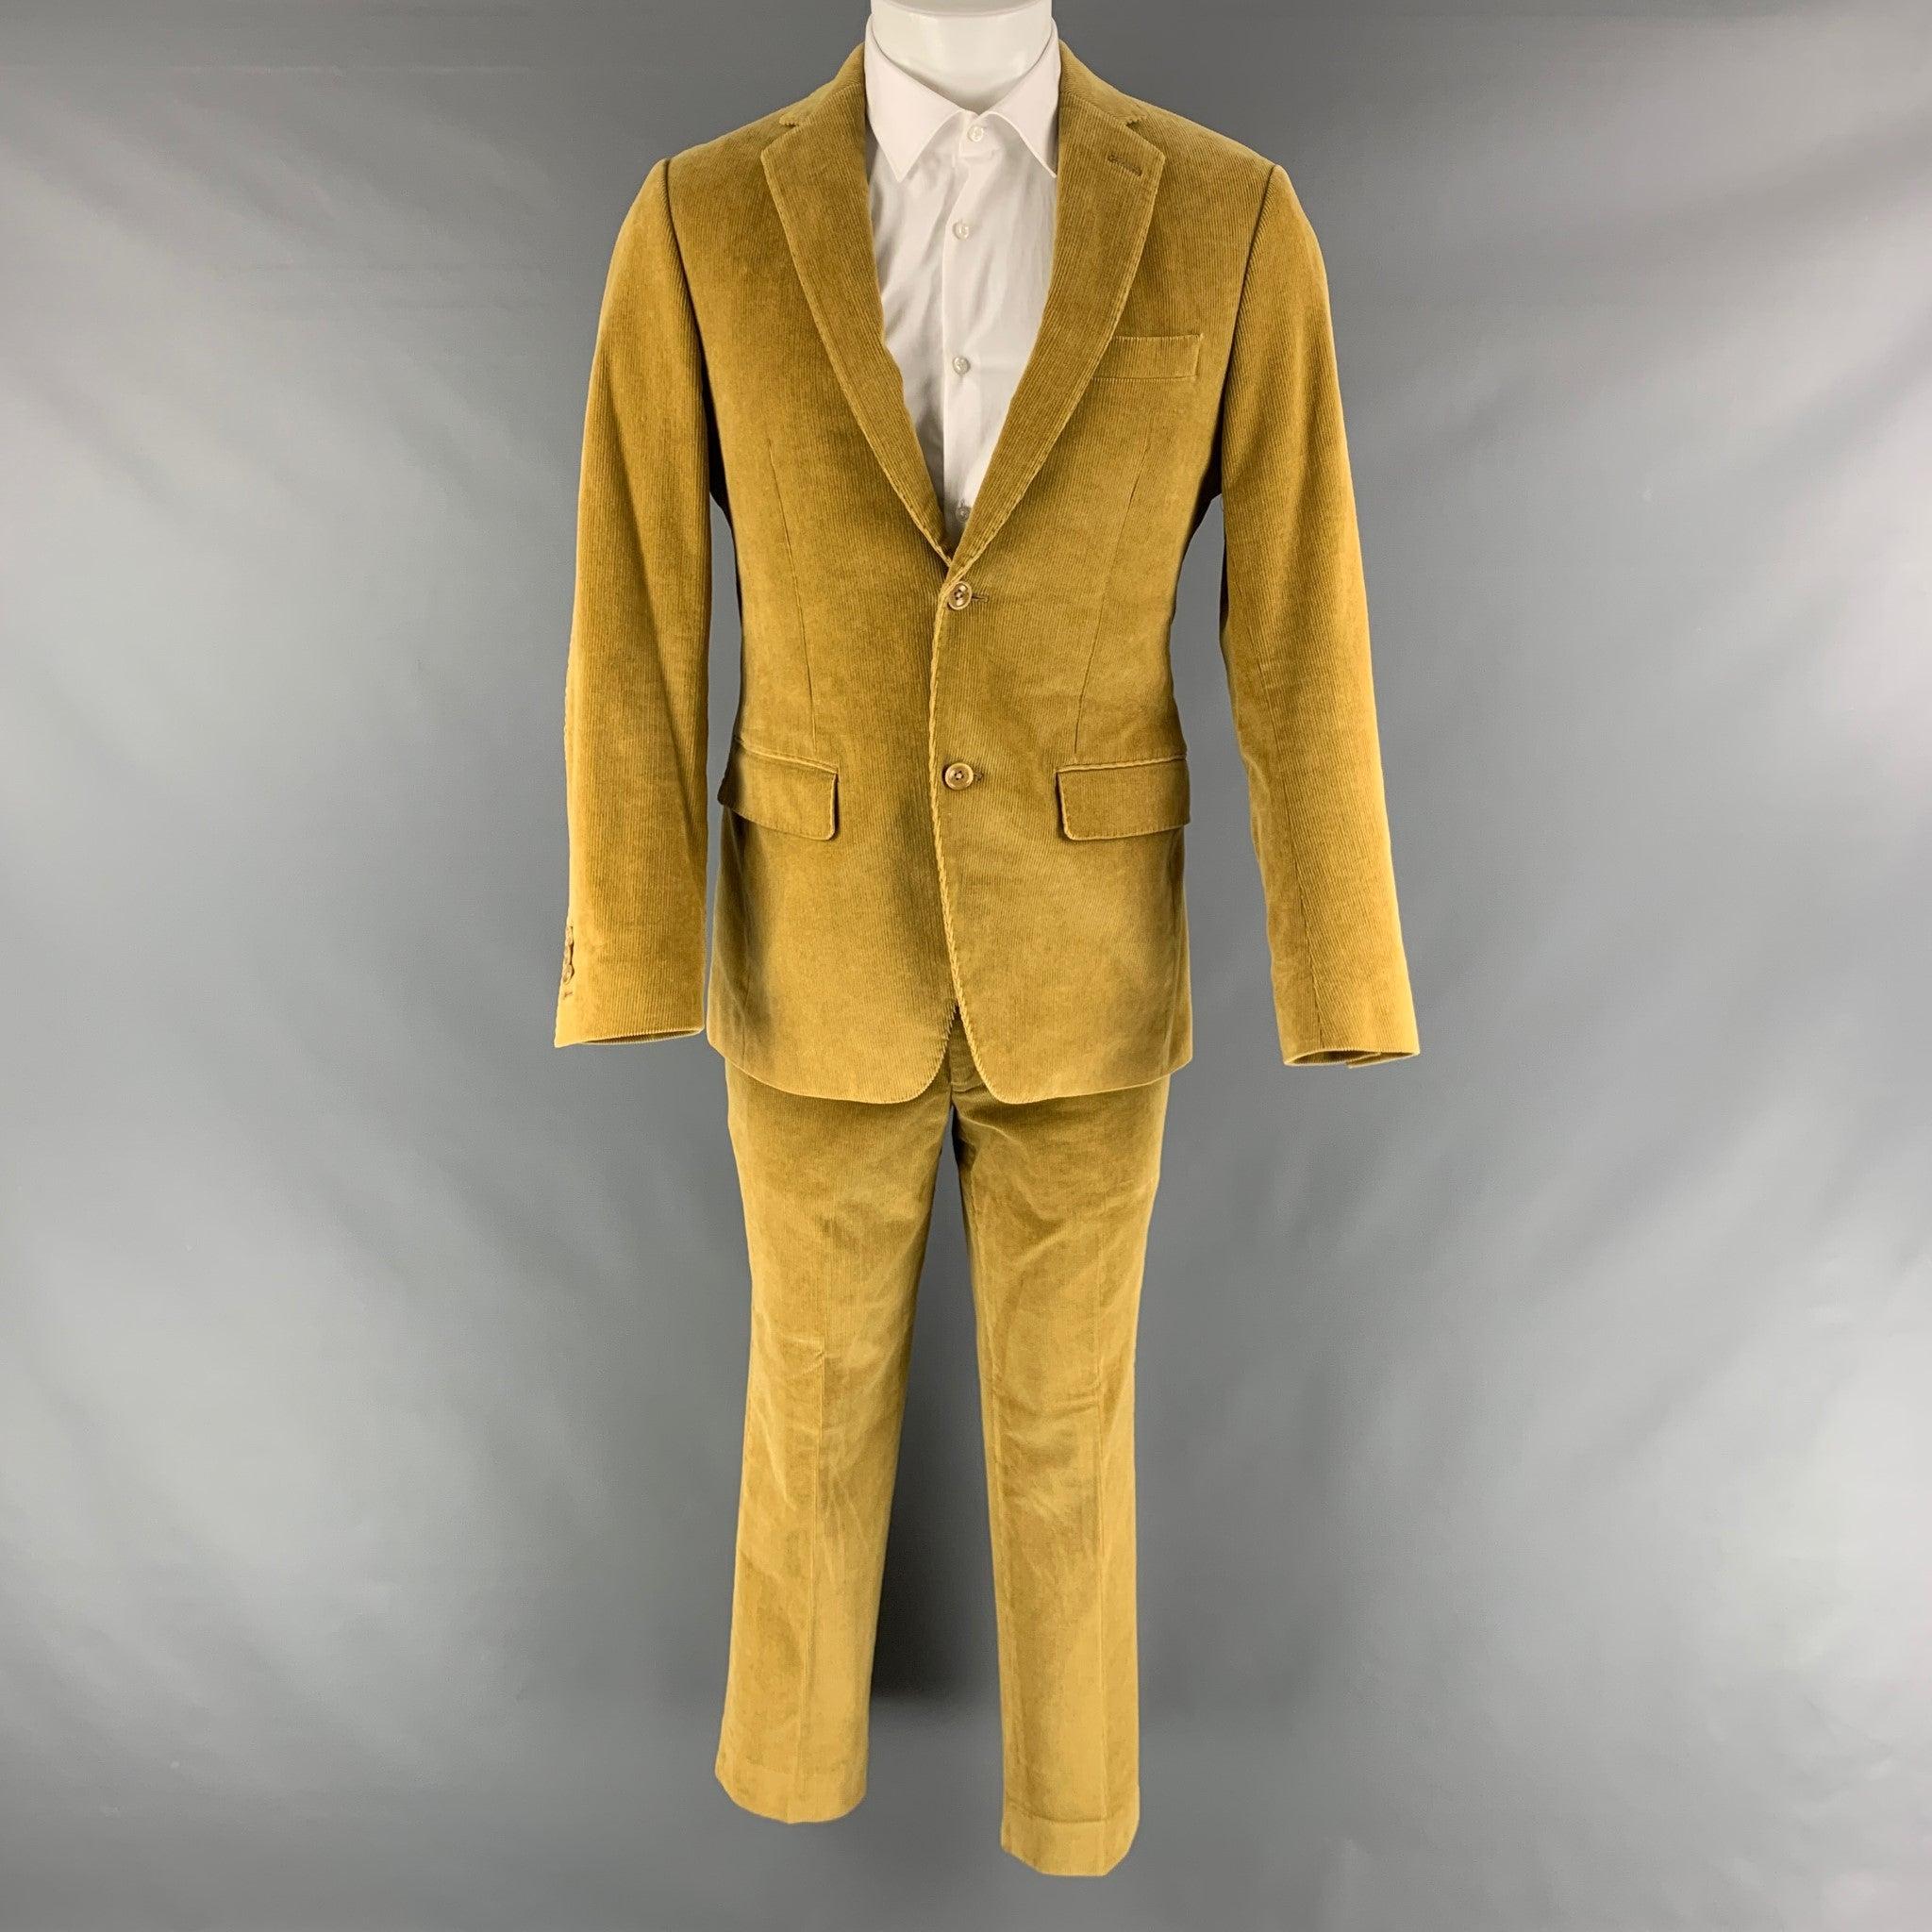 SAKS FIFTH AVENUE MODERN suit comes in a yellow corduroy with a full liner and includes a single breasted, double button sport coat with a notch lapel and matching flat front trousers.Excellent Pre-Owned Condition. 

Marked:   40 

Measurements: 
 